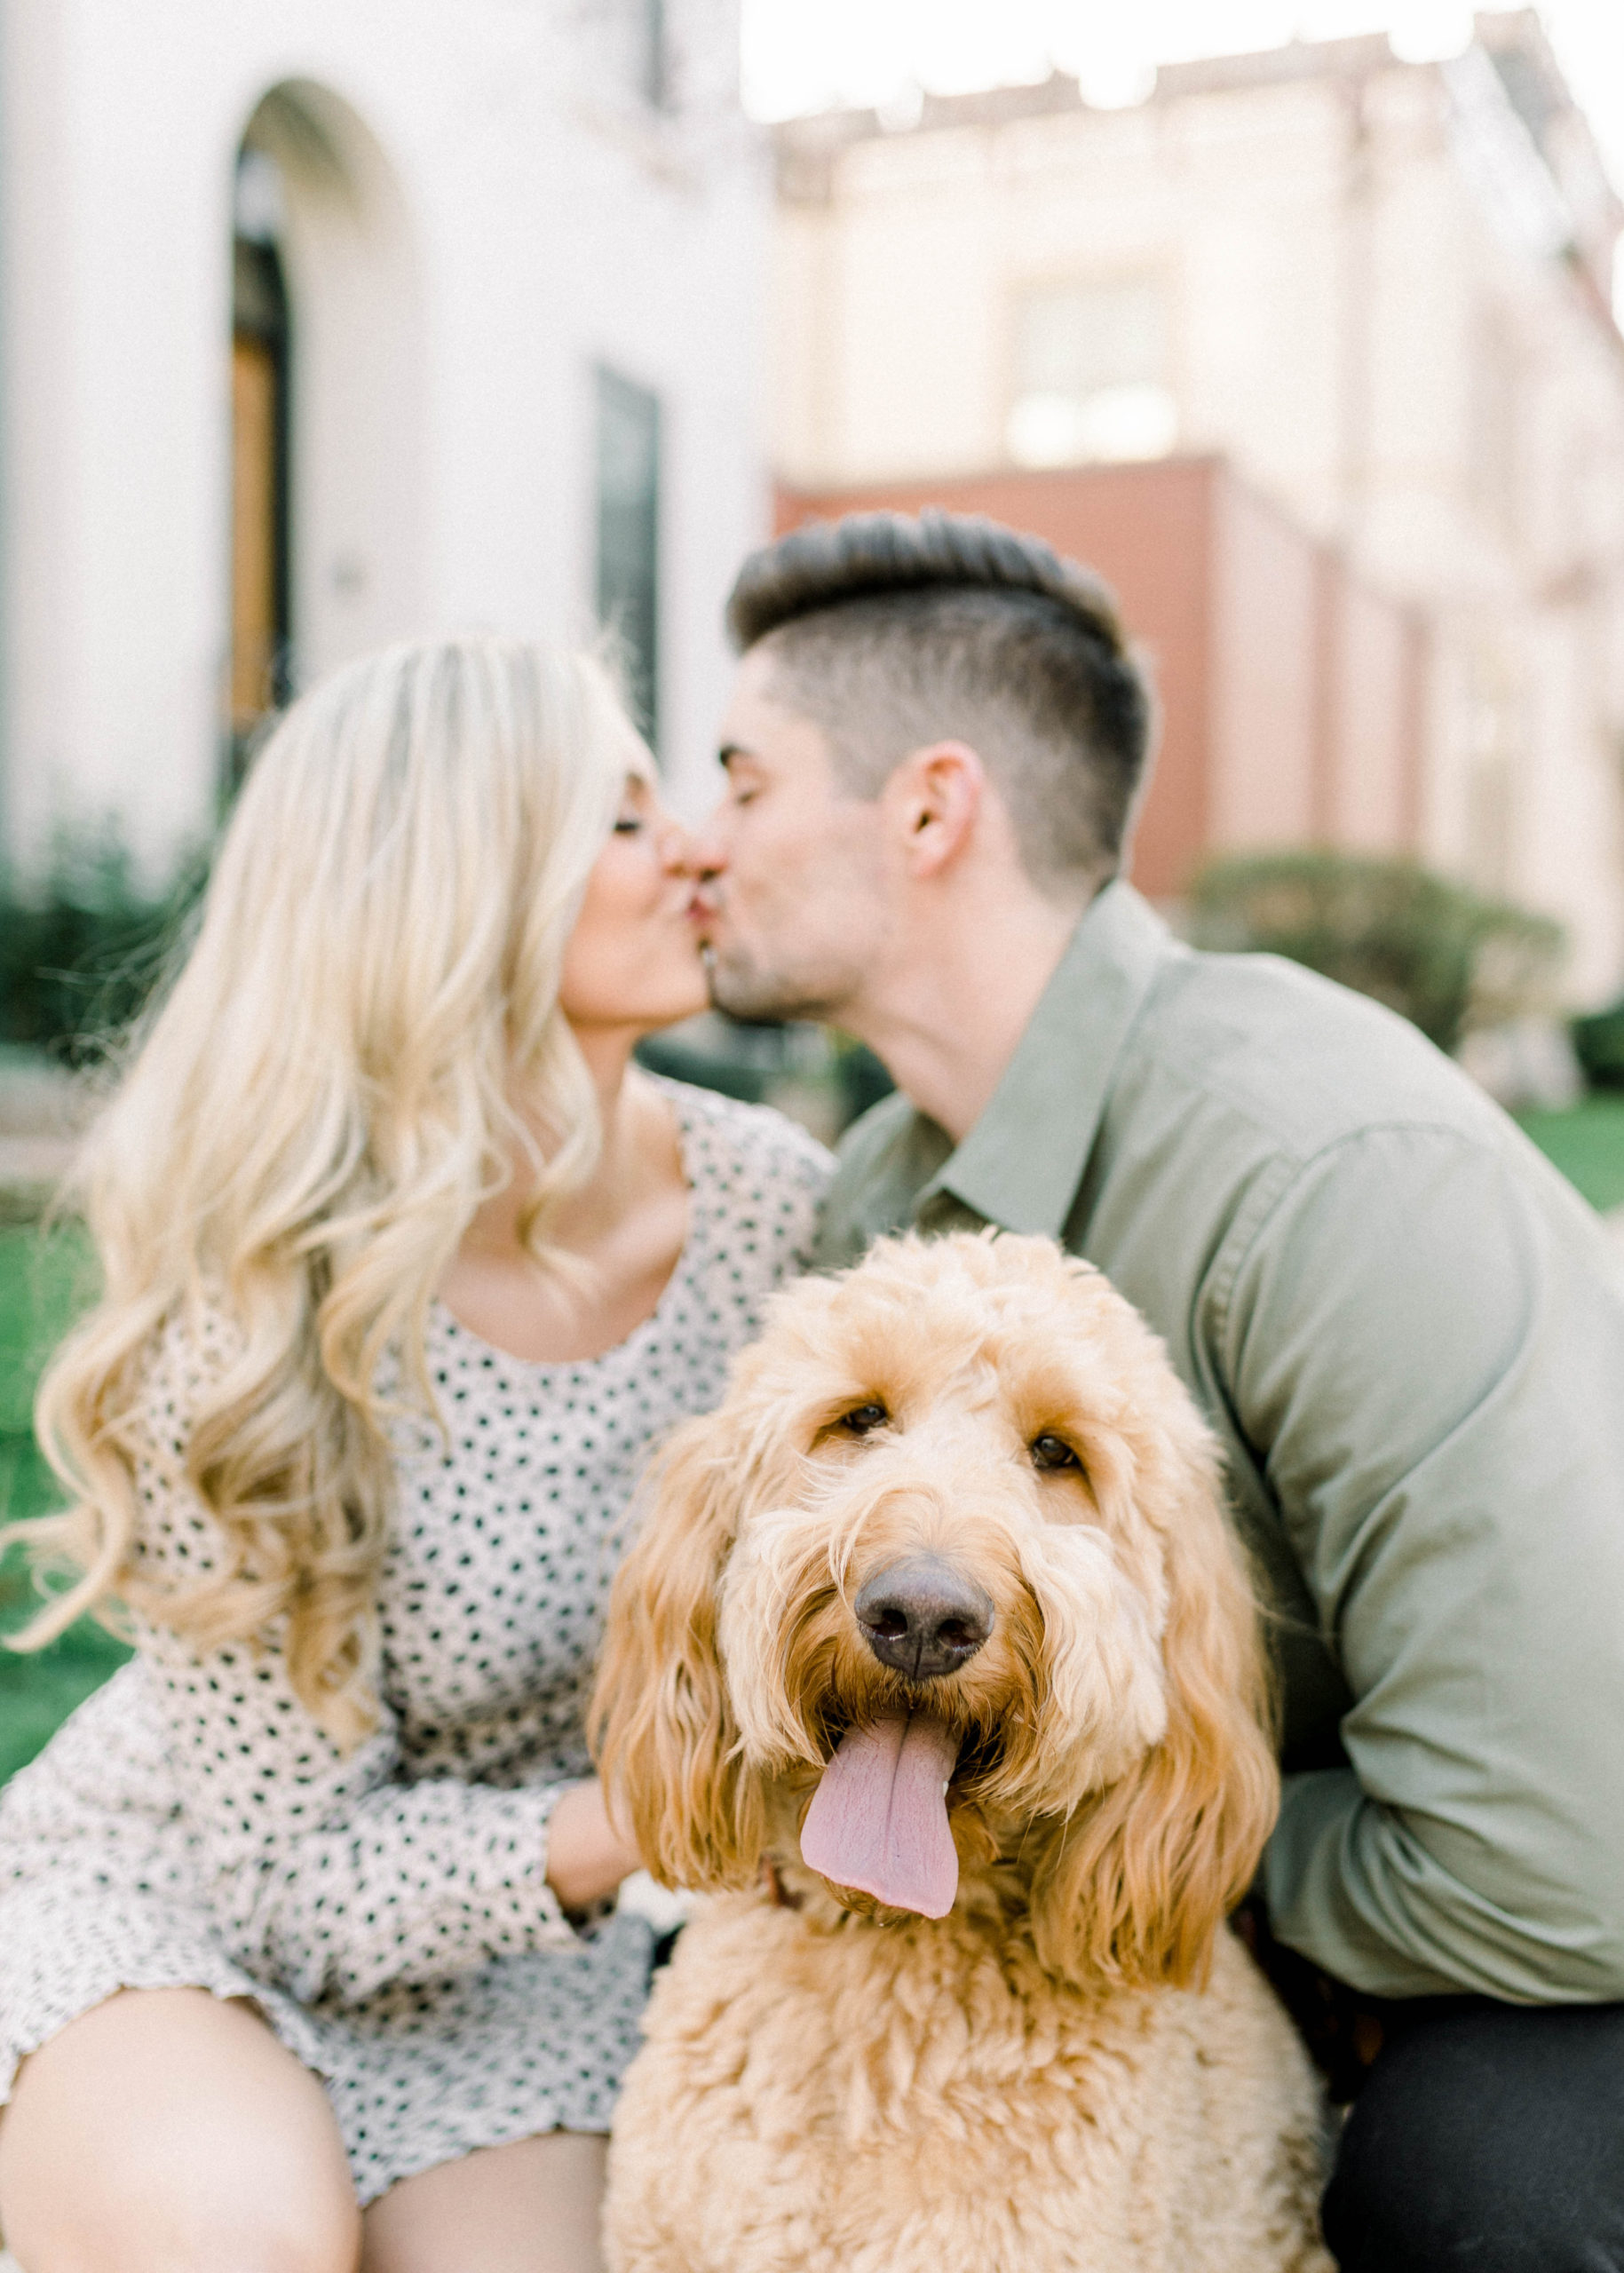 Lafayette Square Spring Engagement Session with a Puppy